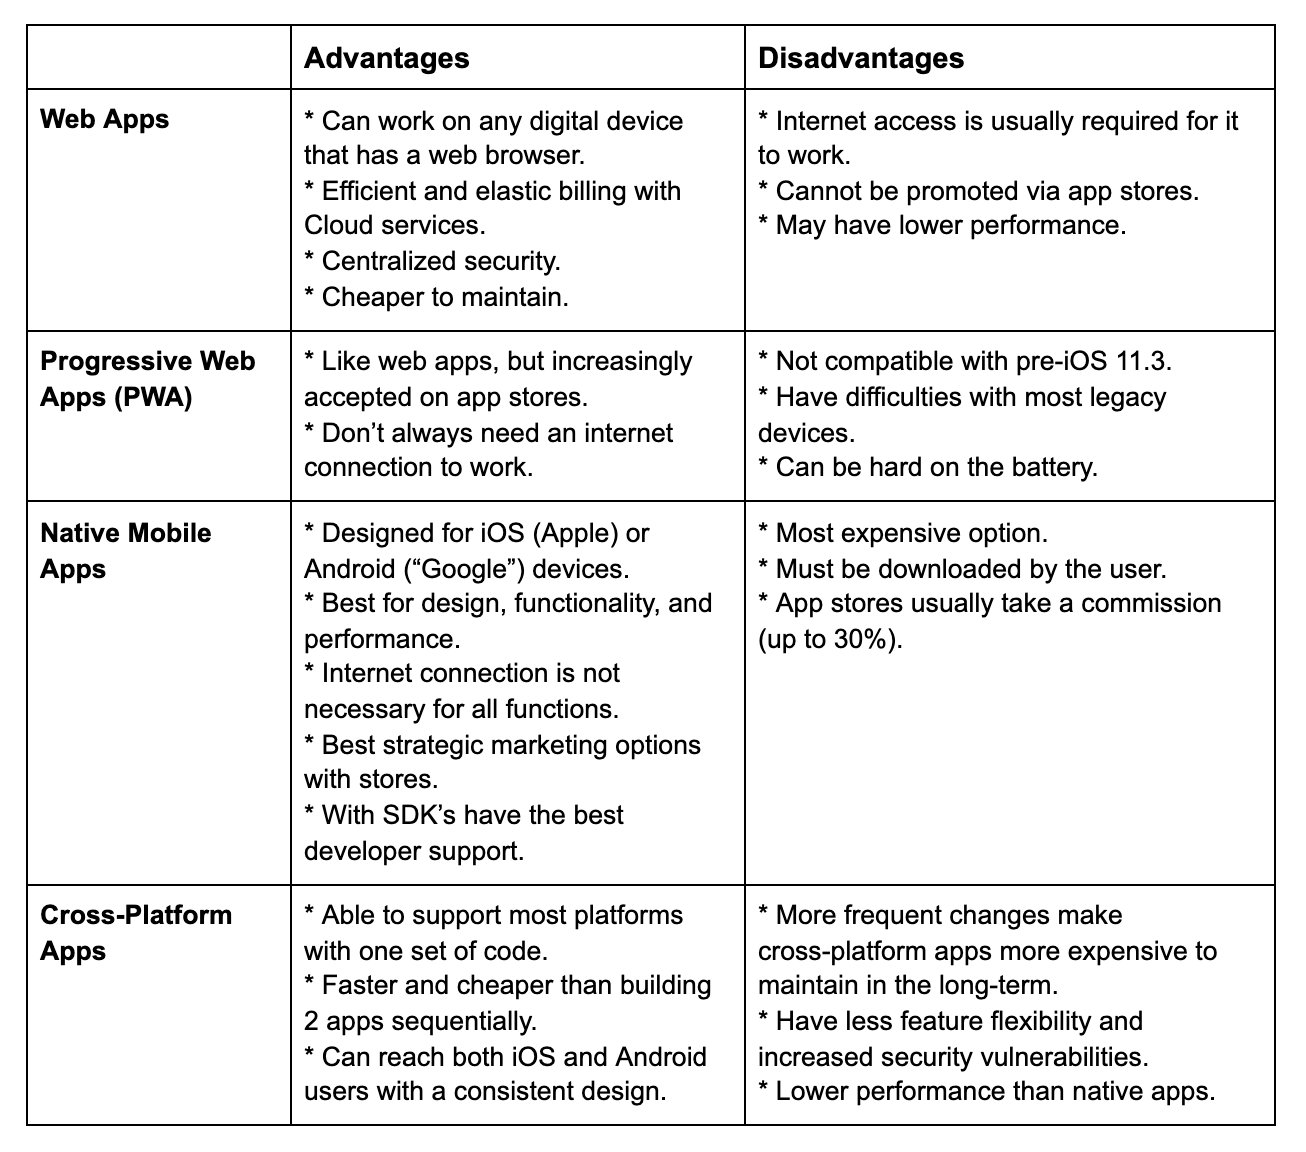 pros and cons of macs